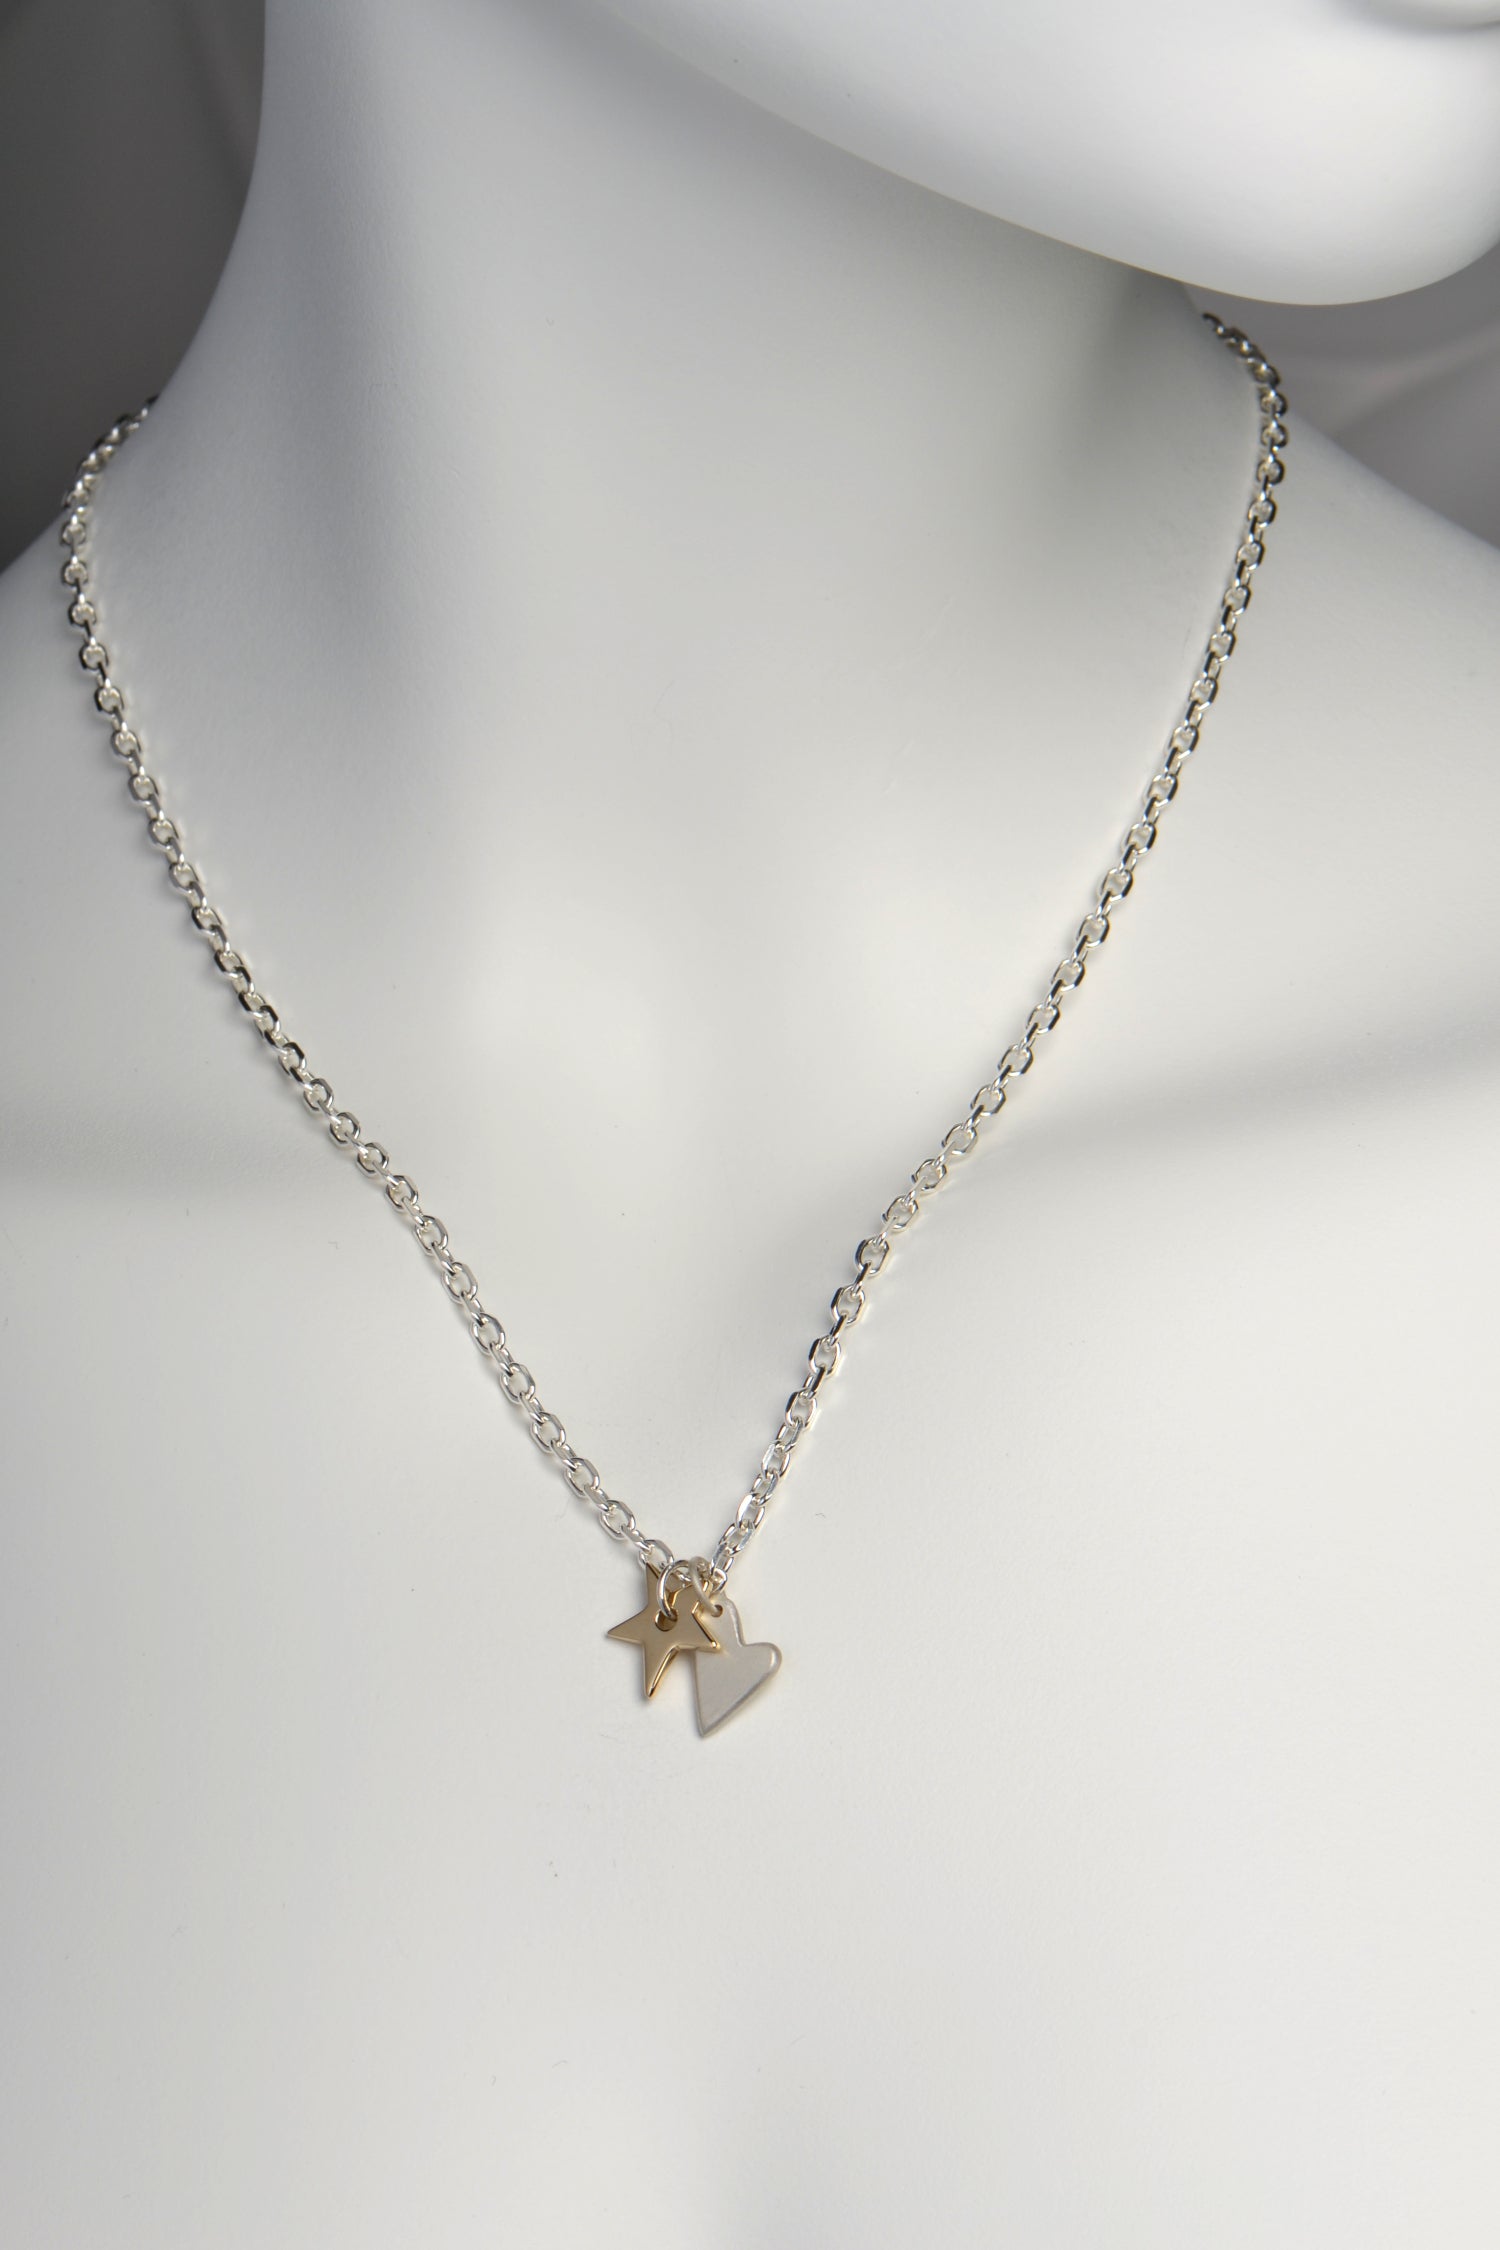 designer handmade necklace with a 9ct yellow gold star and silver heart pendant